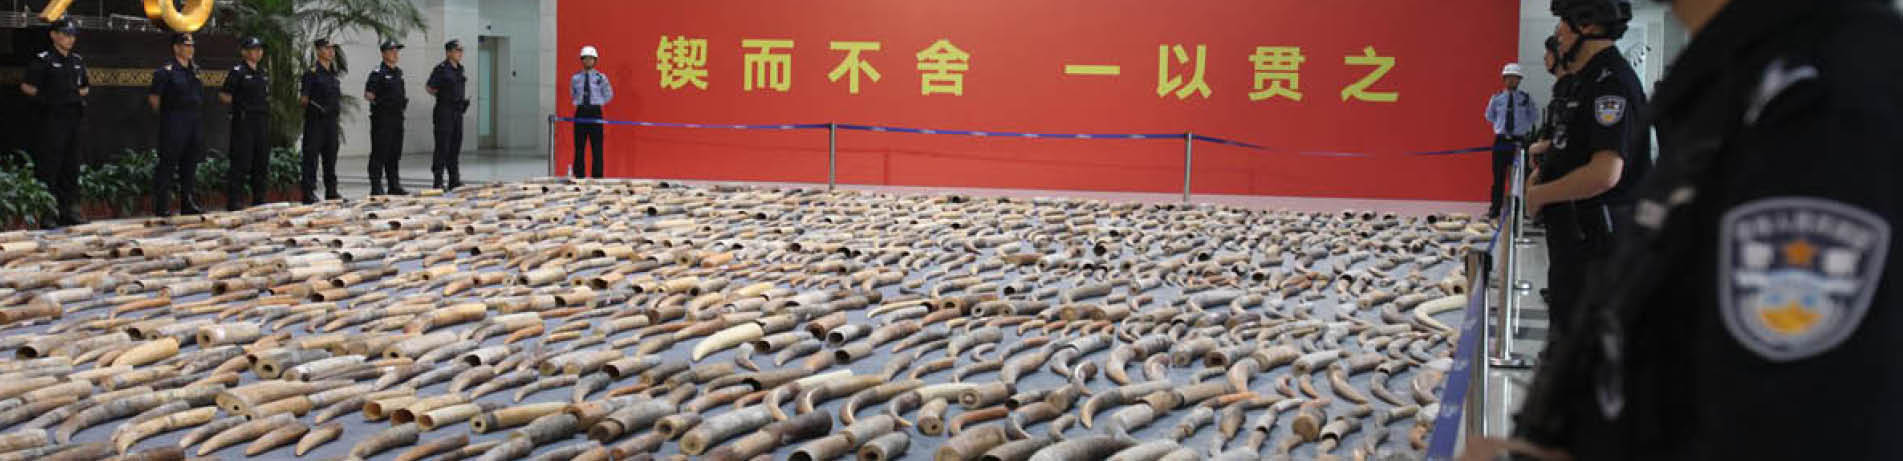 China Customs display ivory seized in the country